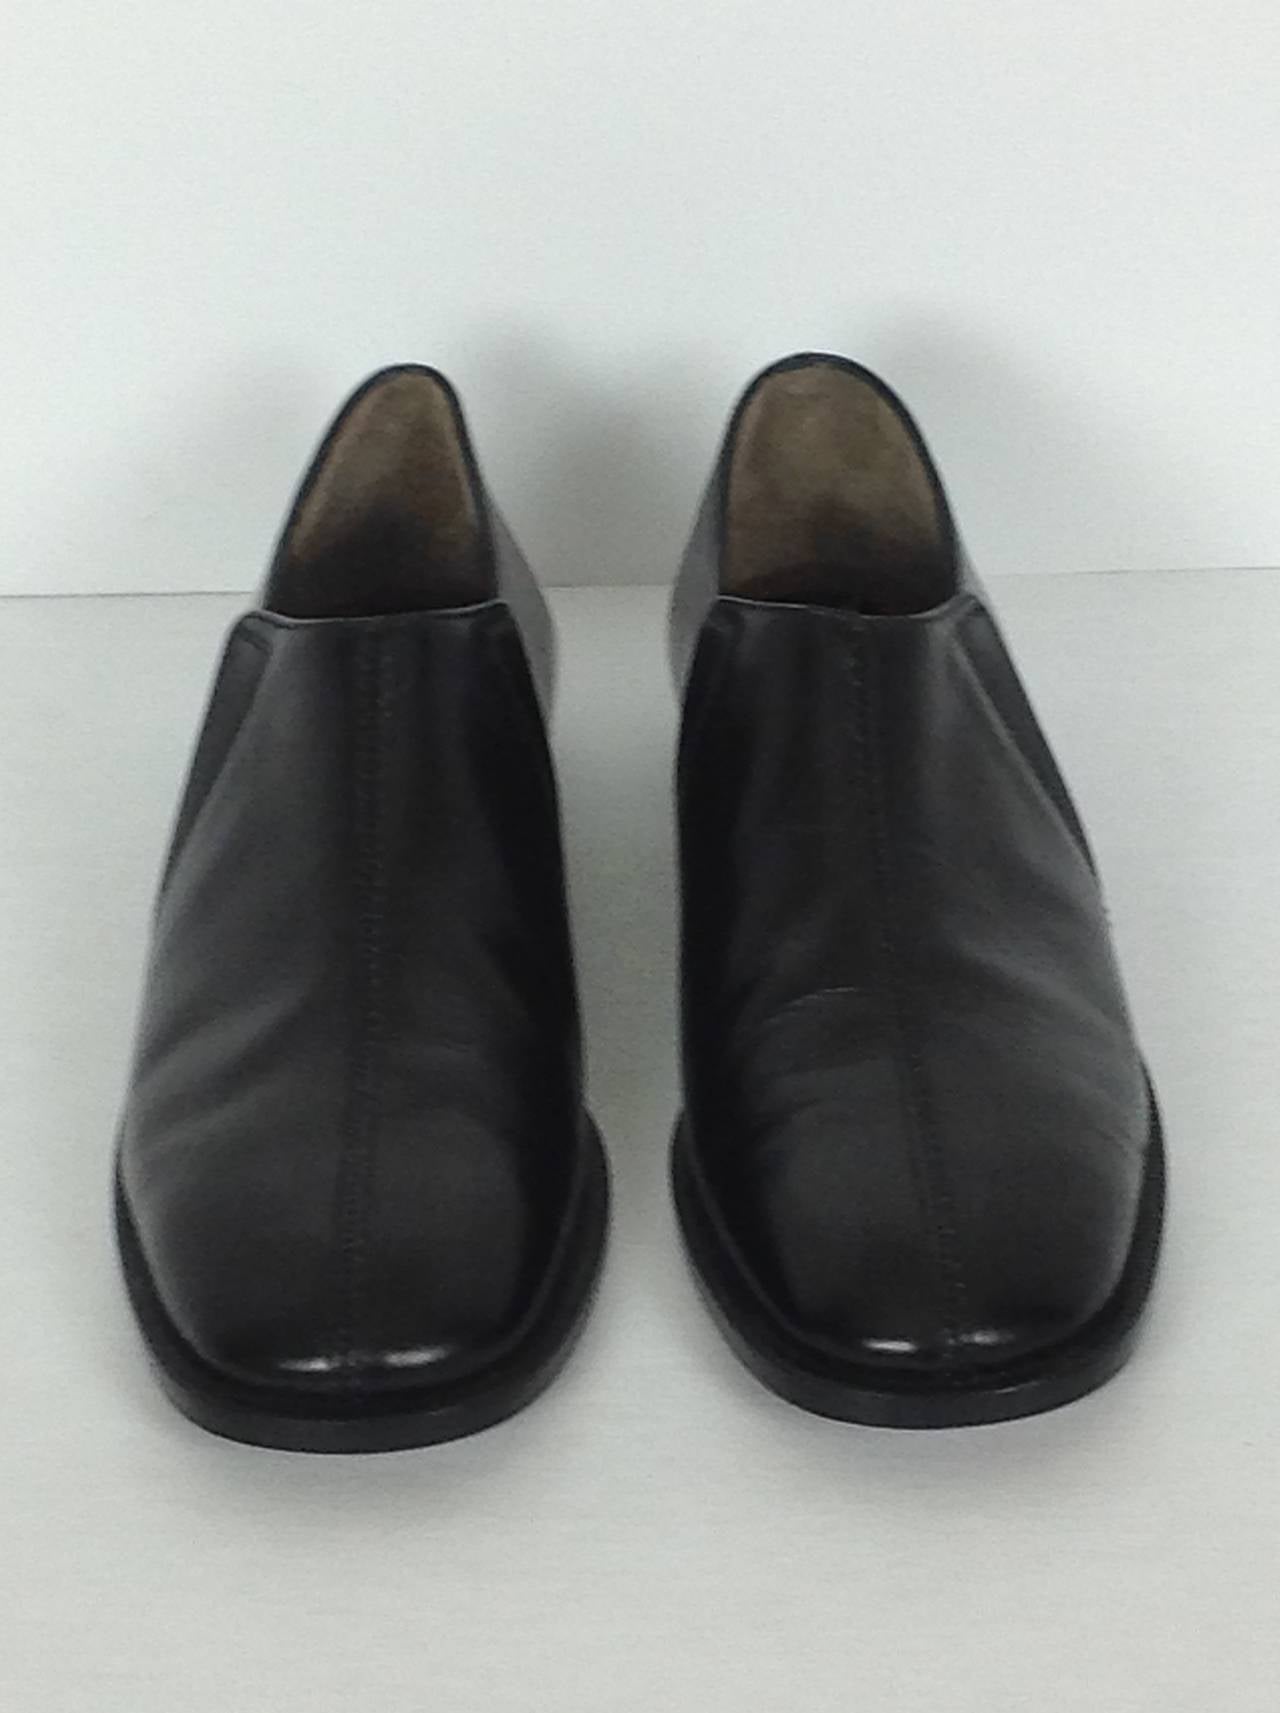 NEW black leather slip on loafers by Marni.
Smooth calfskin.  Made in Italy.
1